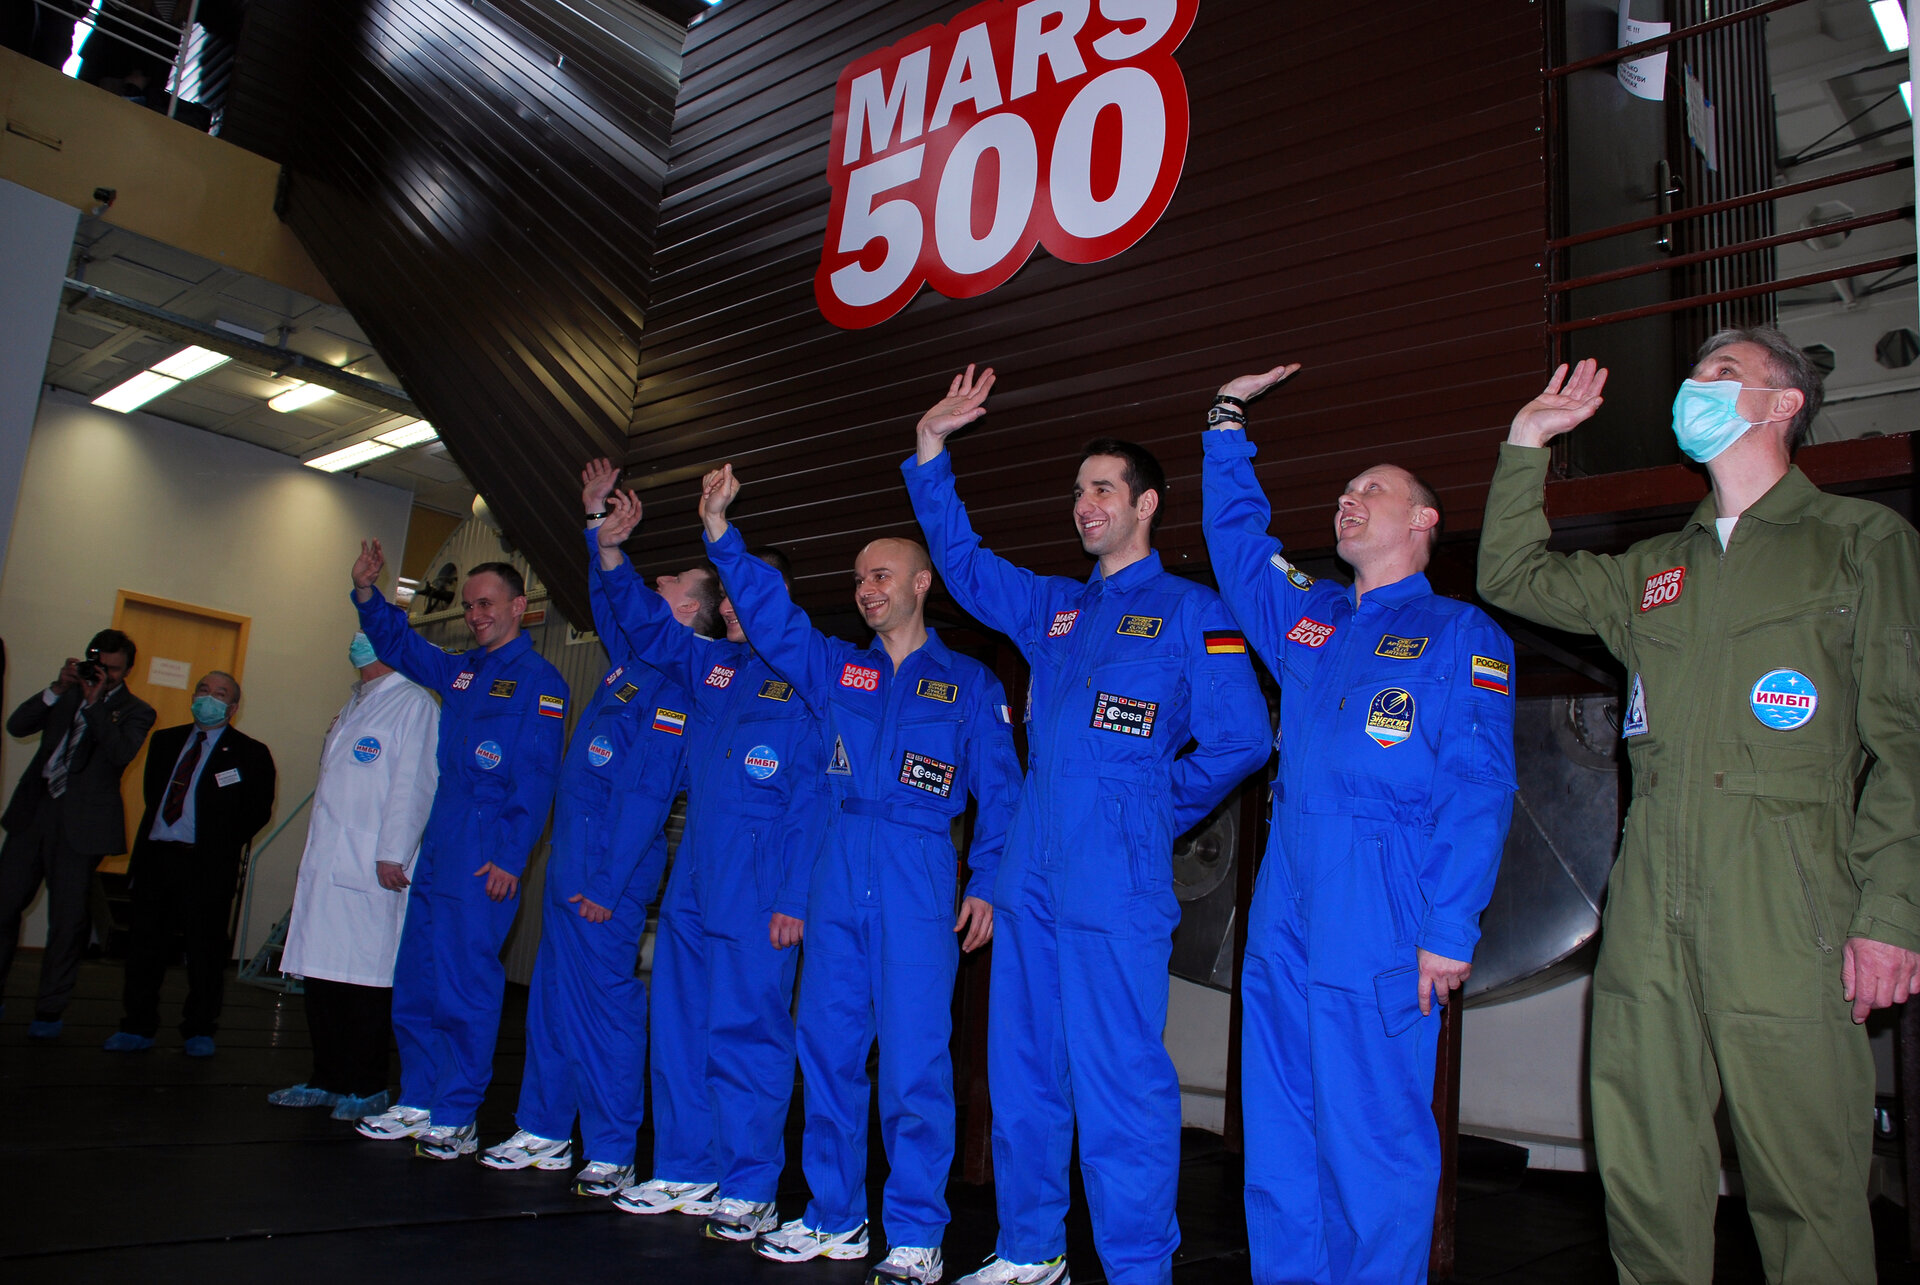 Mars500 crew prepares to enter the isolation facility at IBMP for the 105-day Mars mission simulation